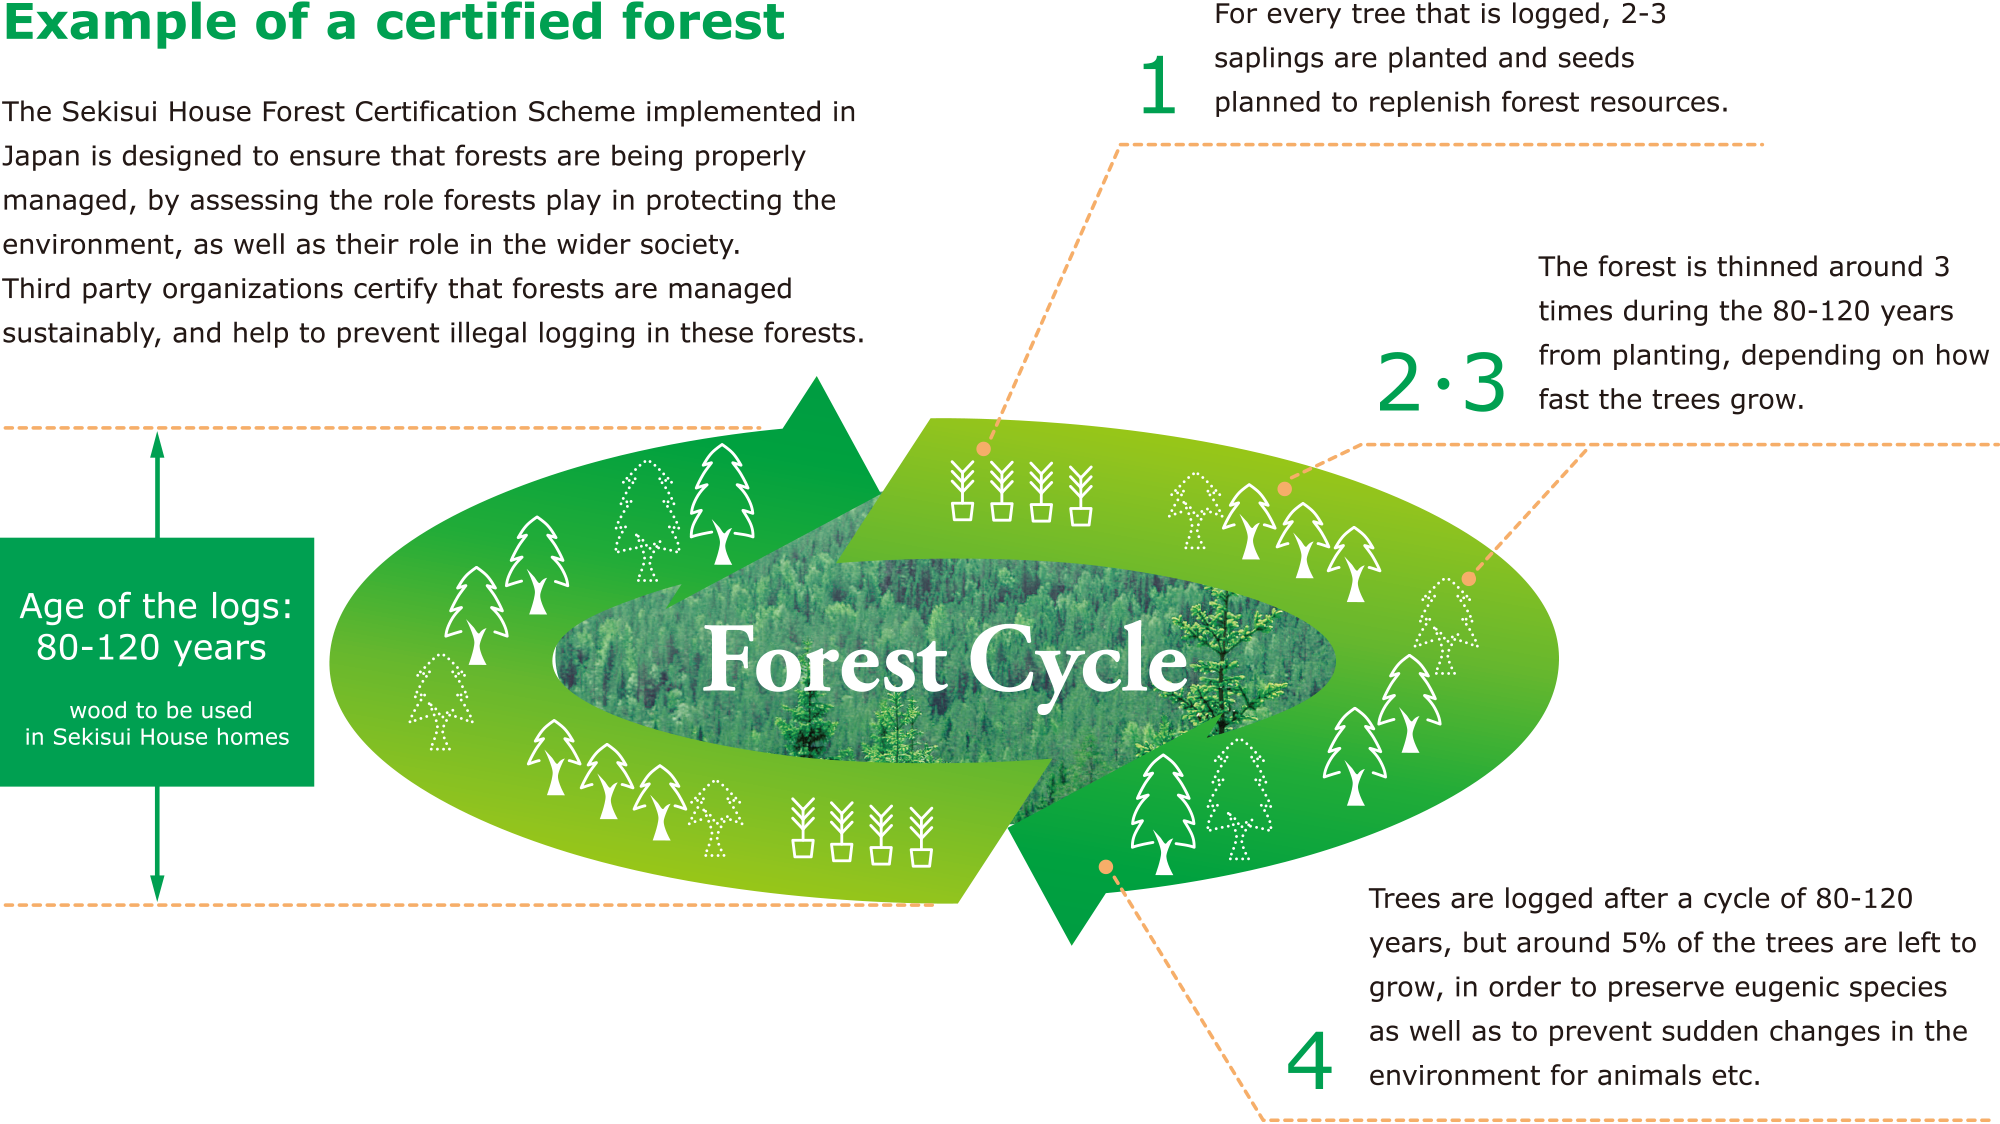 Concept of planting and planned logging in sustainable forests image